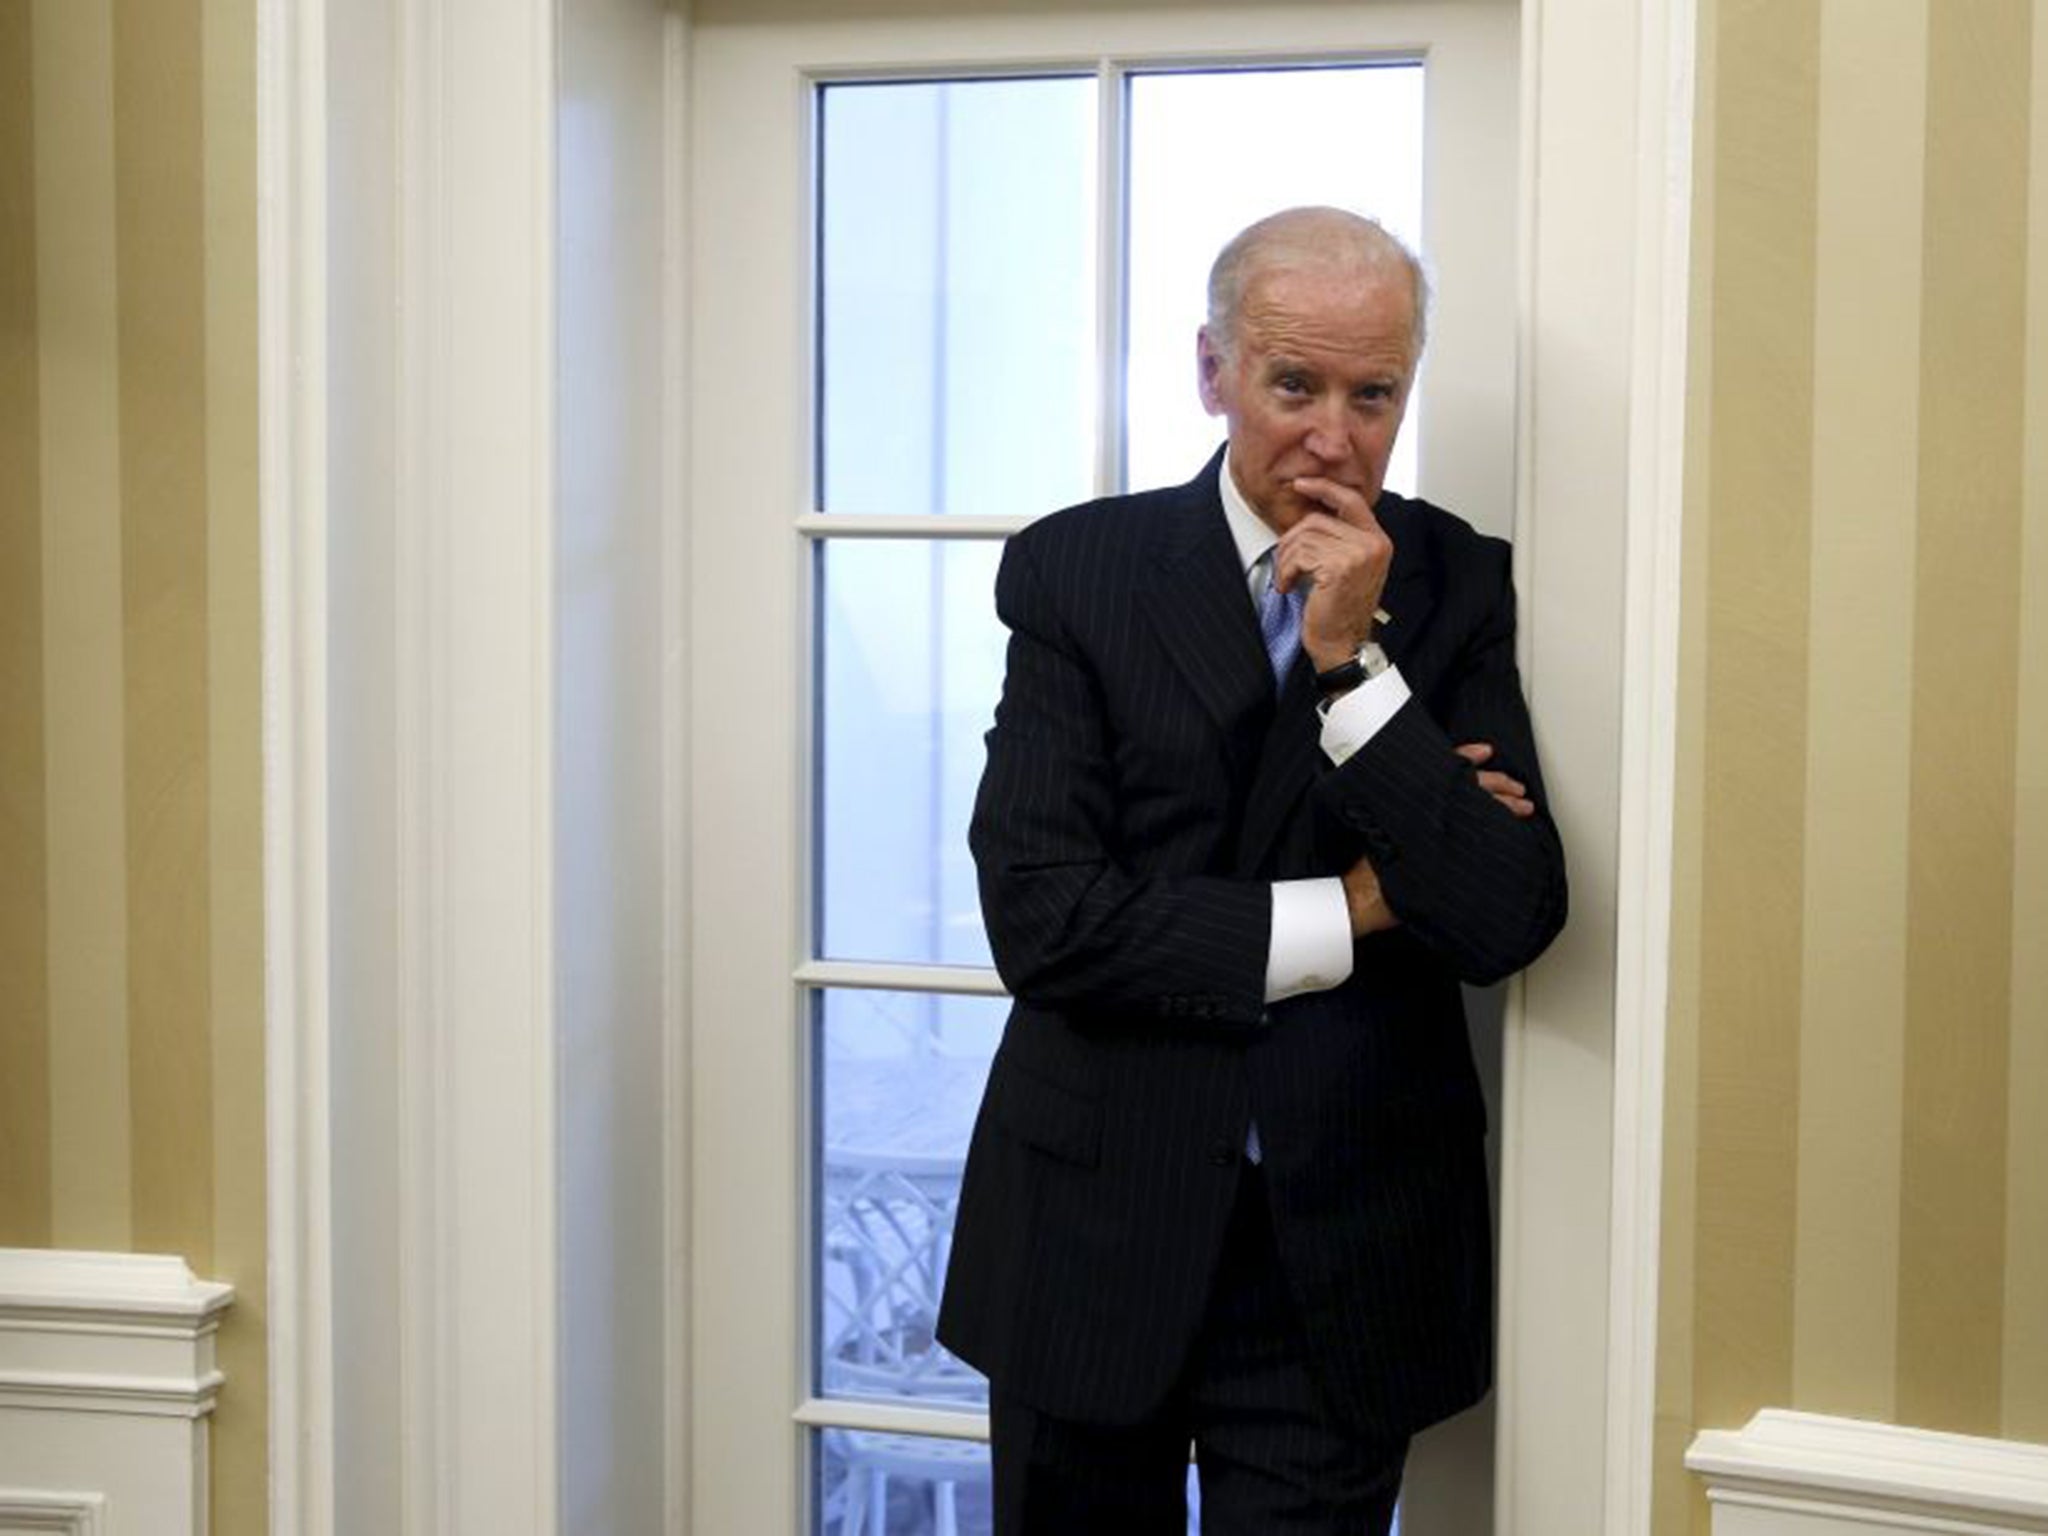 Publicly, grief for his son ended Joe Biden’s White House ambitions, but the resurgence of Hillary Clinton must also have been a factor